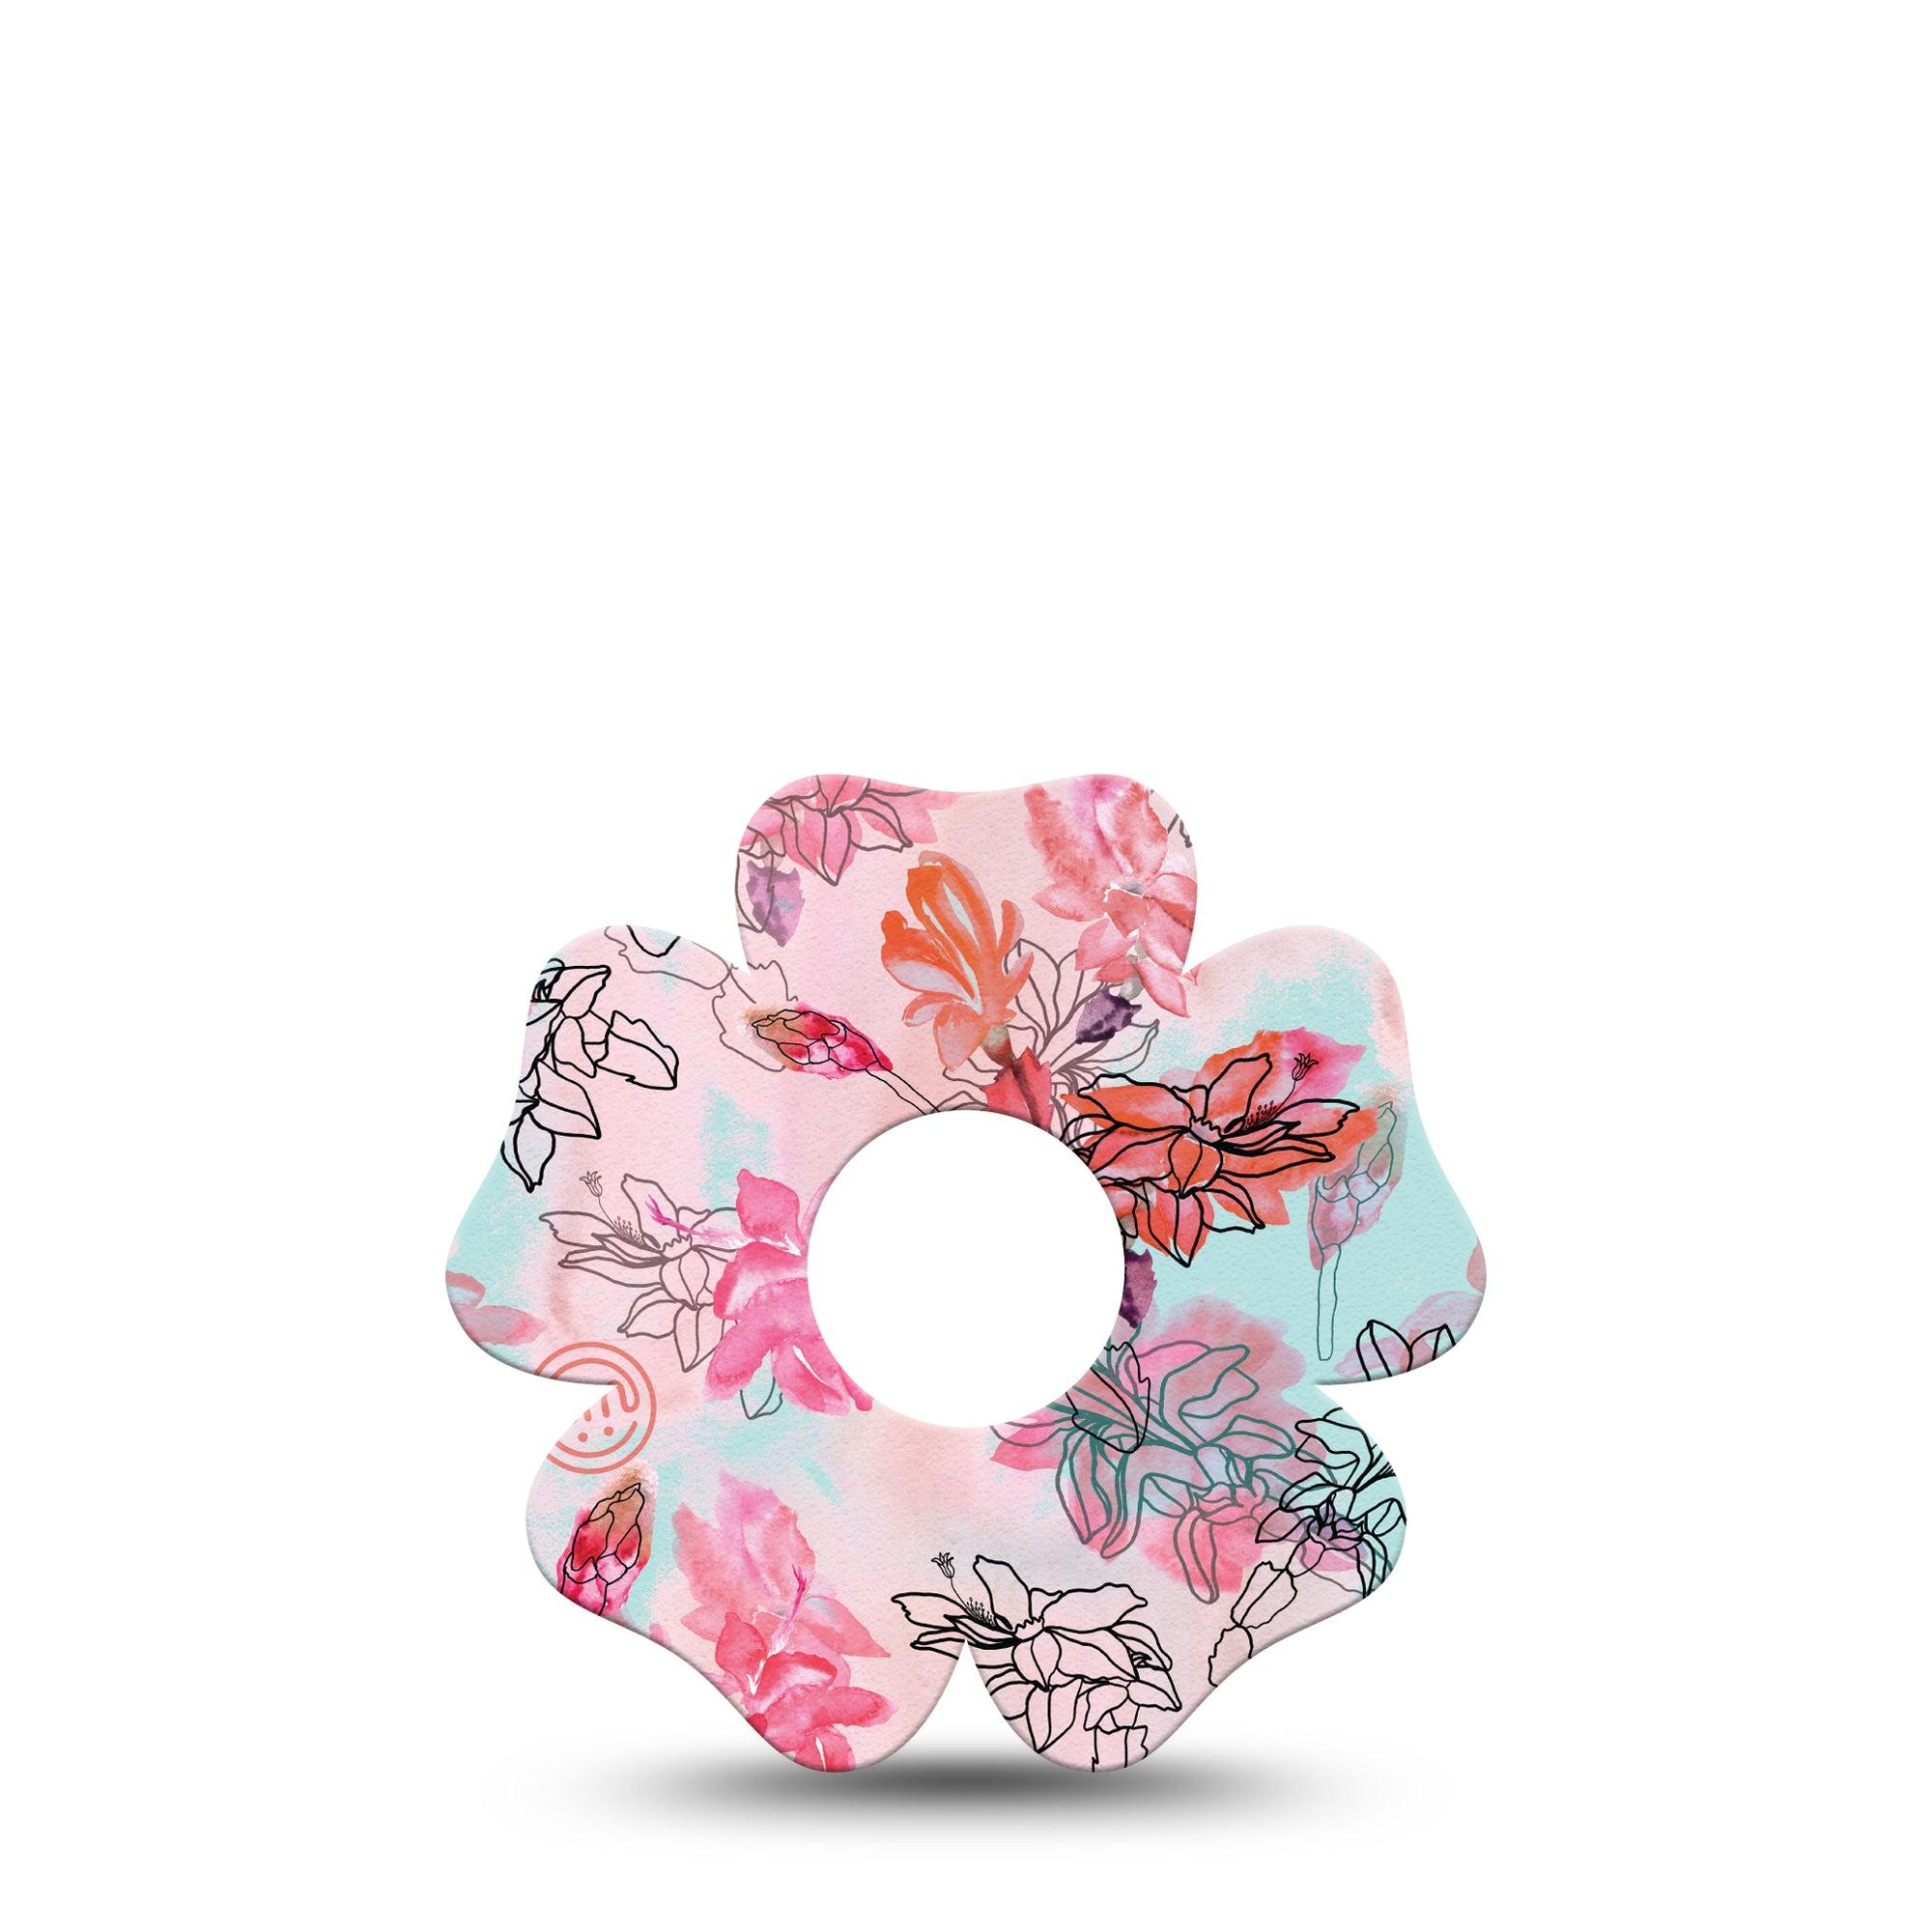 ExpressionMed Whimsical Blossoms Flower Libre 3 Tape, Single, Pastel Colored Florals Themed, CGM Plaster Patch Design